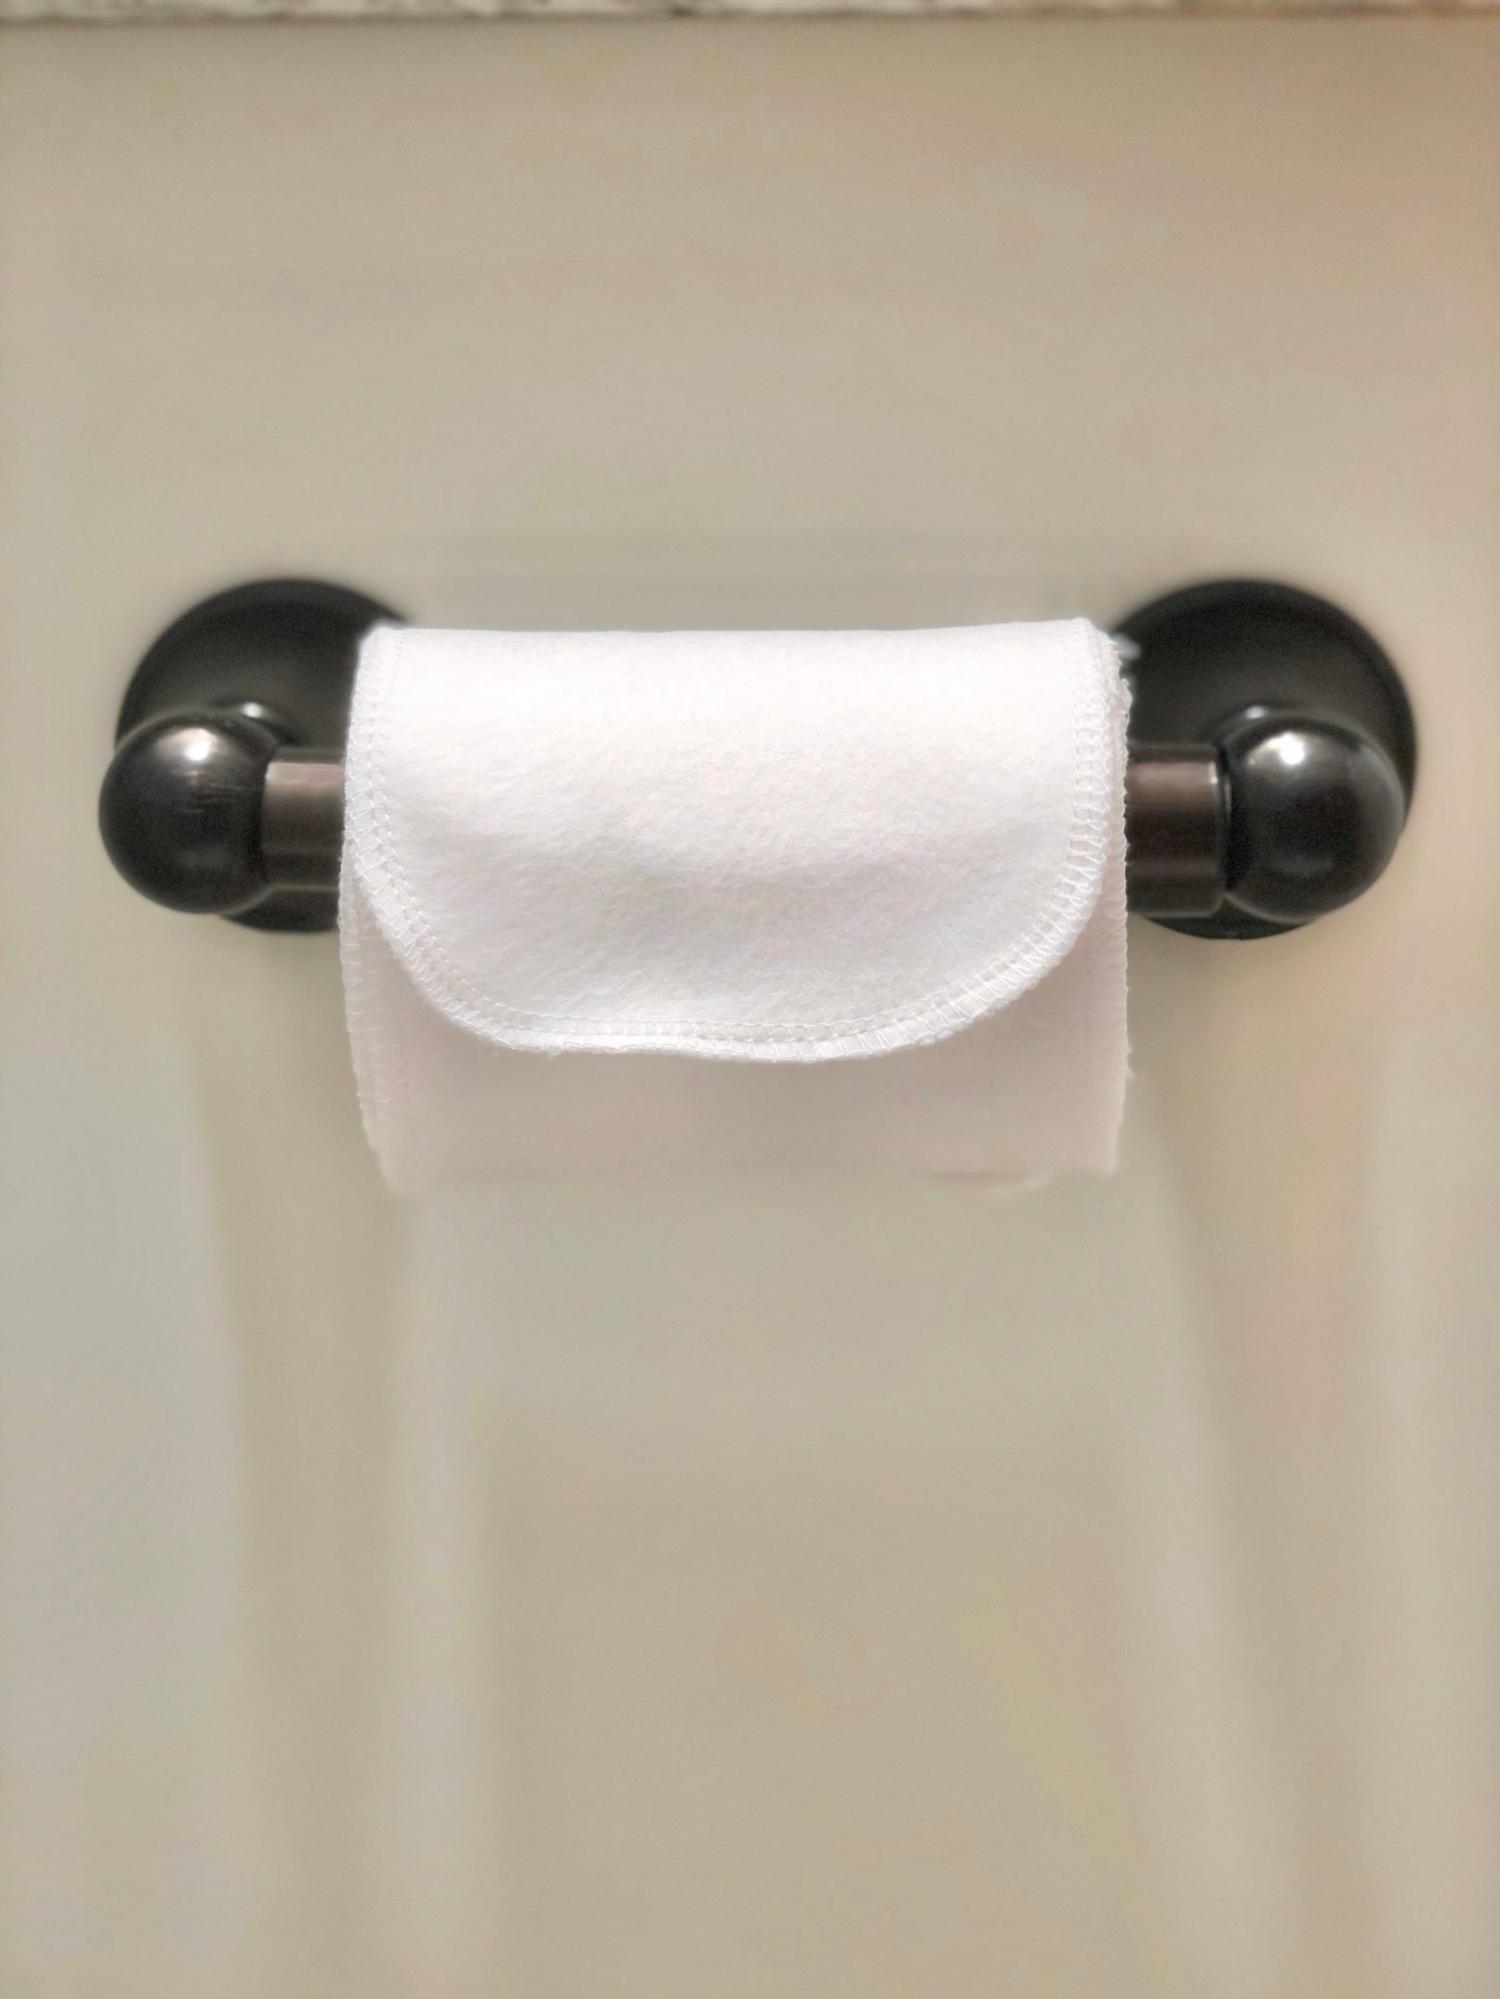 Reusable Toilet Paper With Snaps